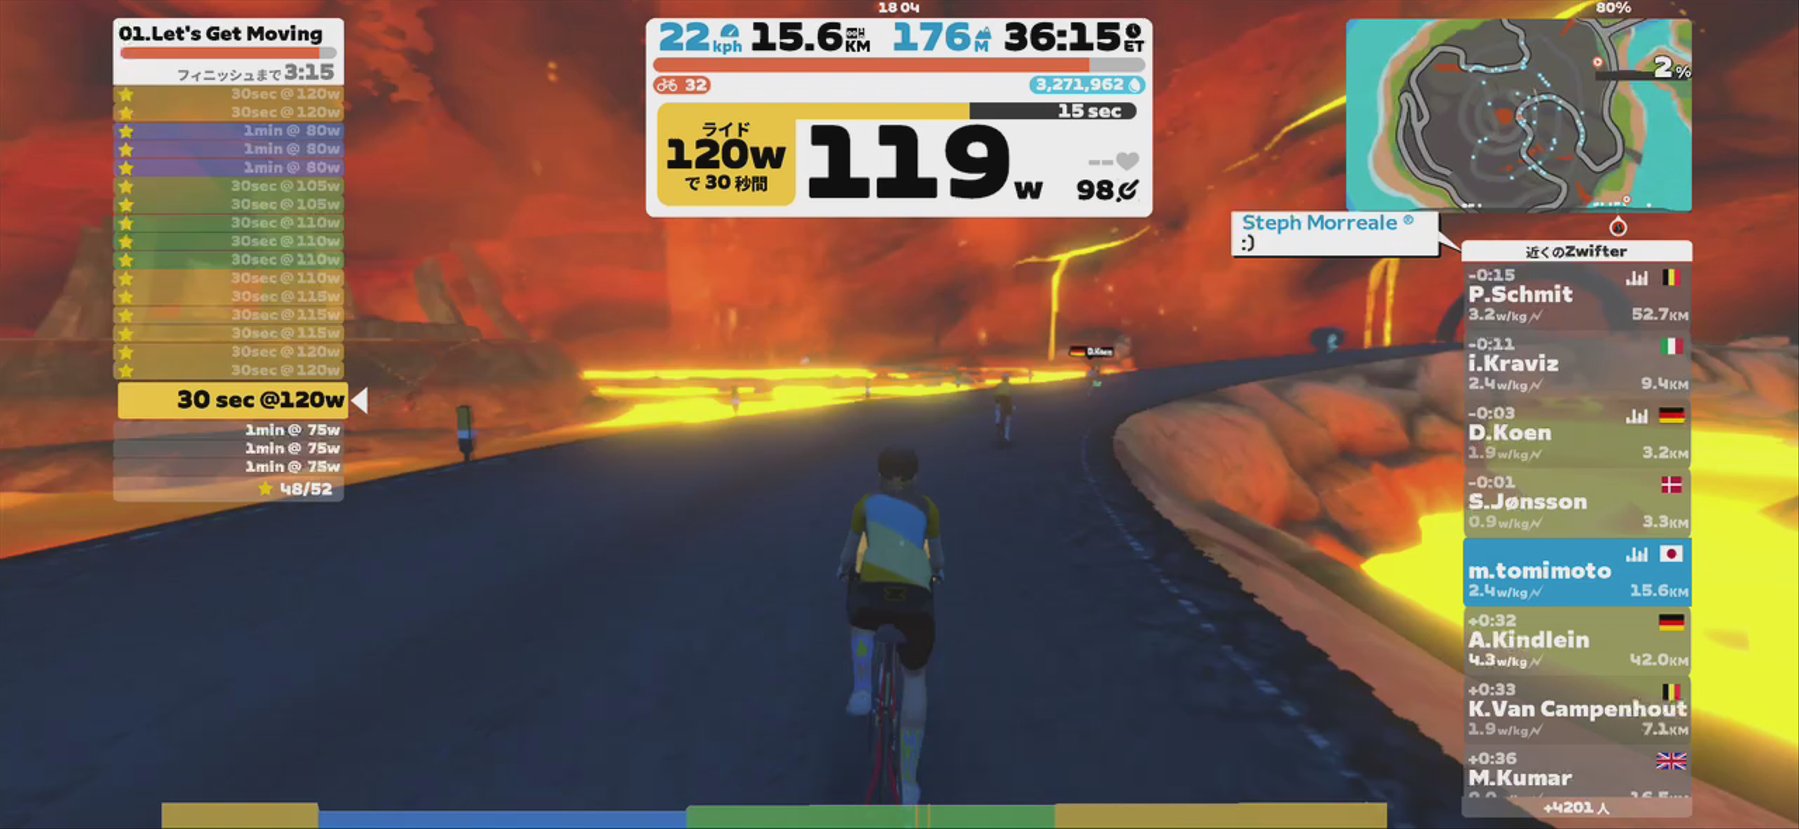 Zwift - 01. Let's Get Moving in Watopia